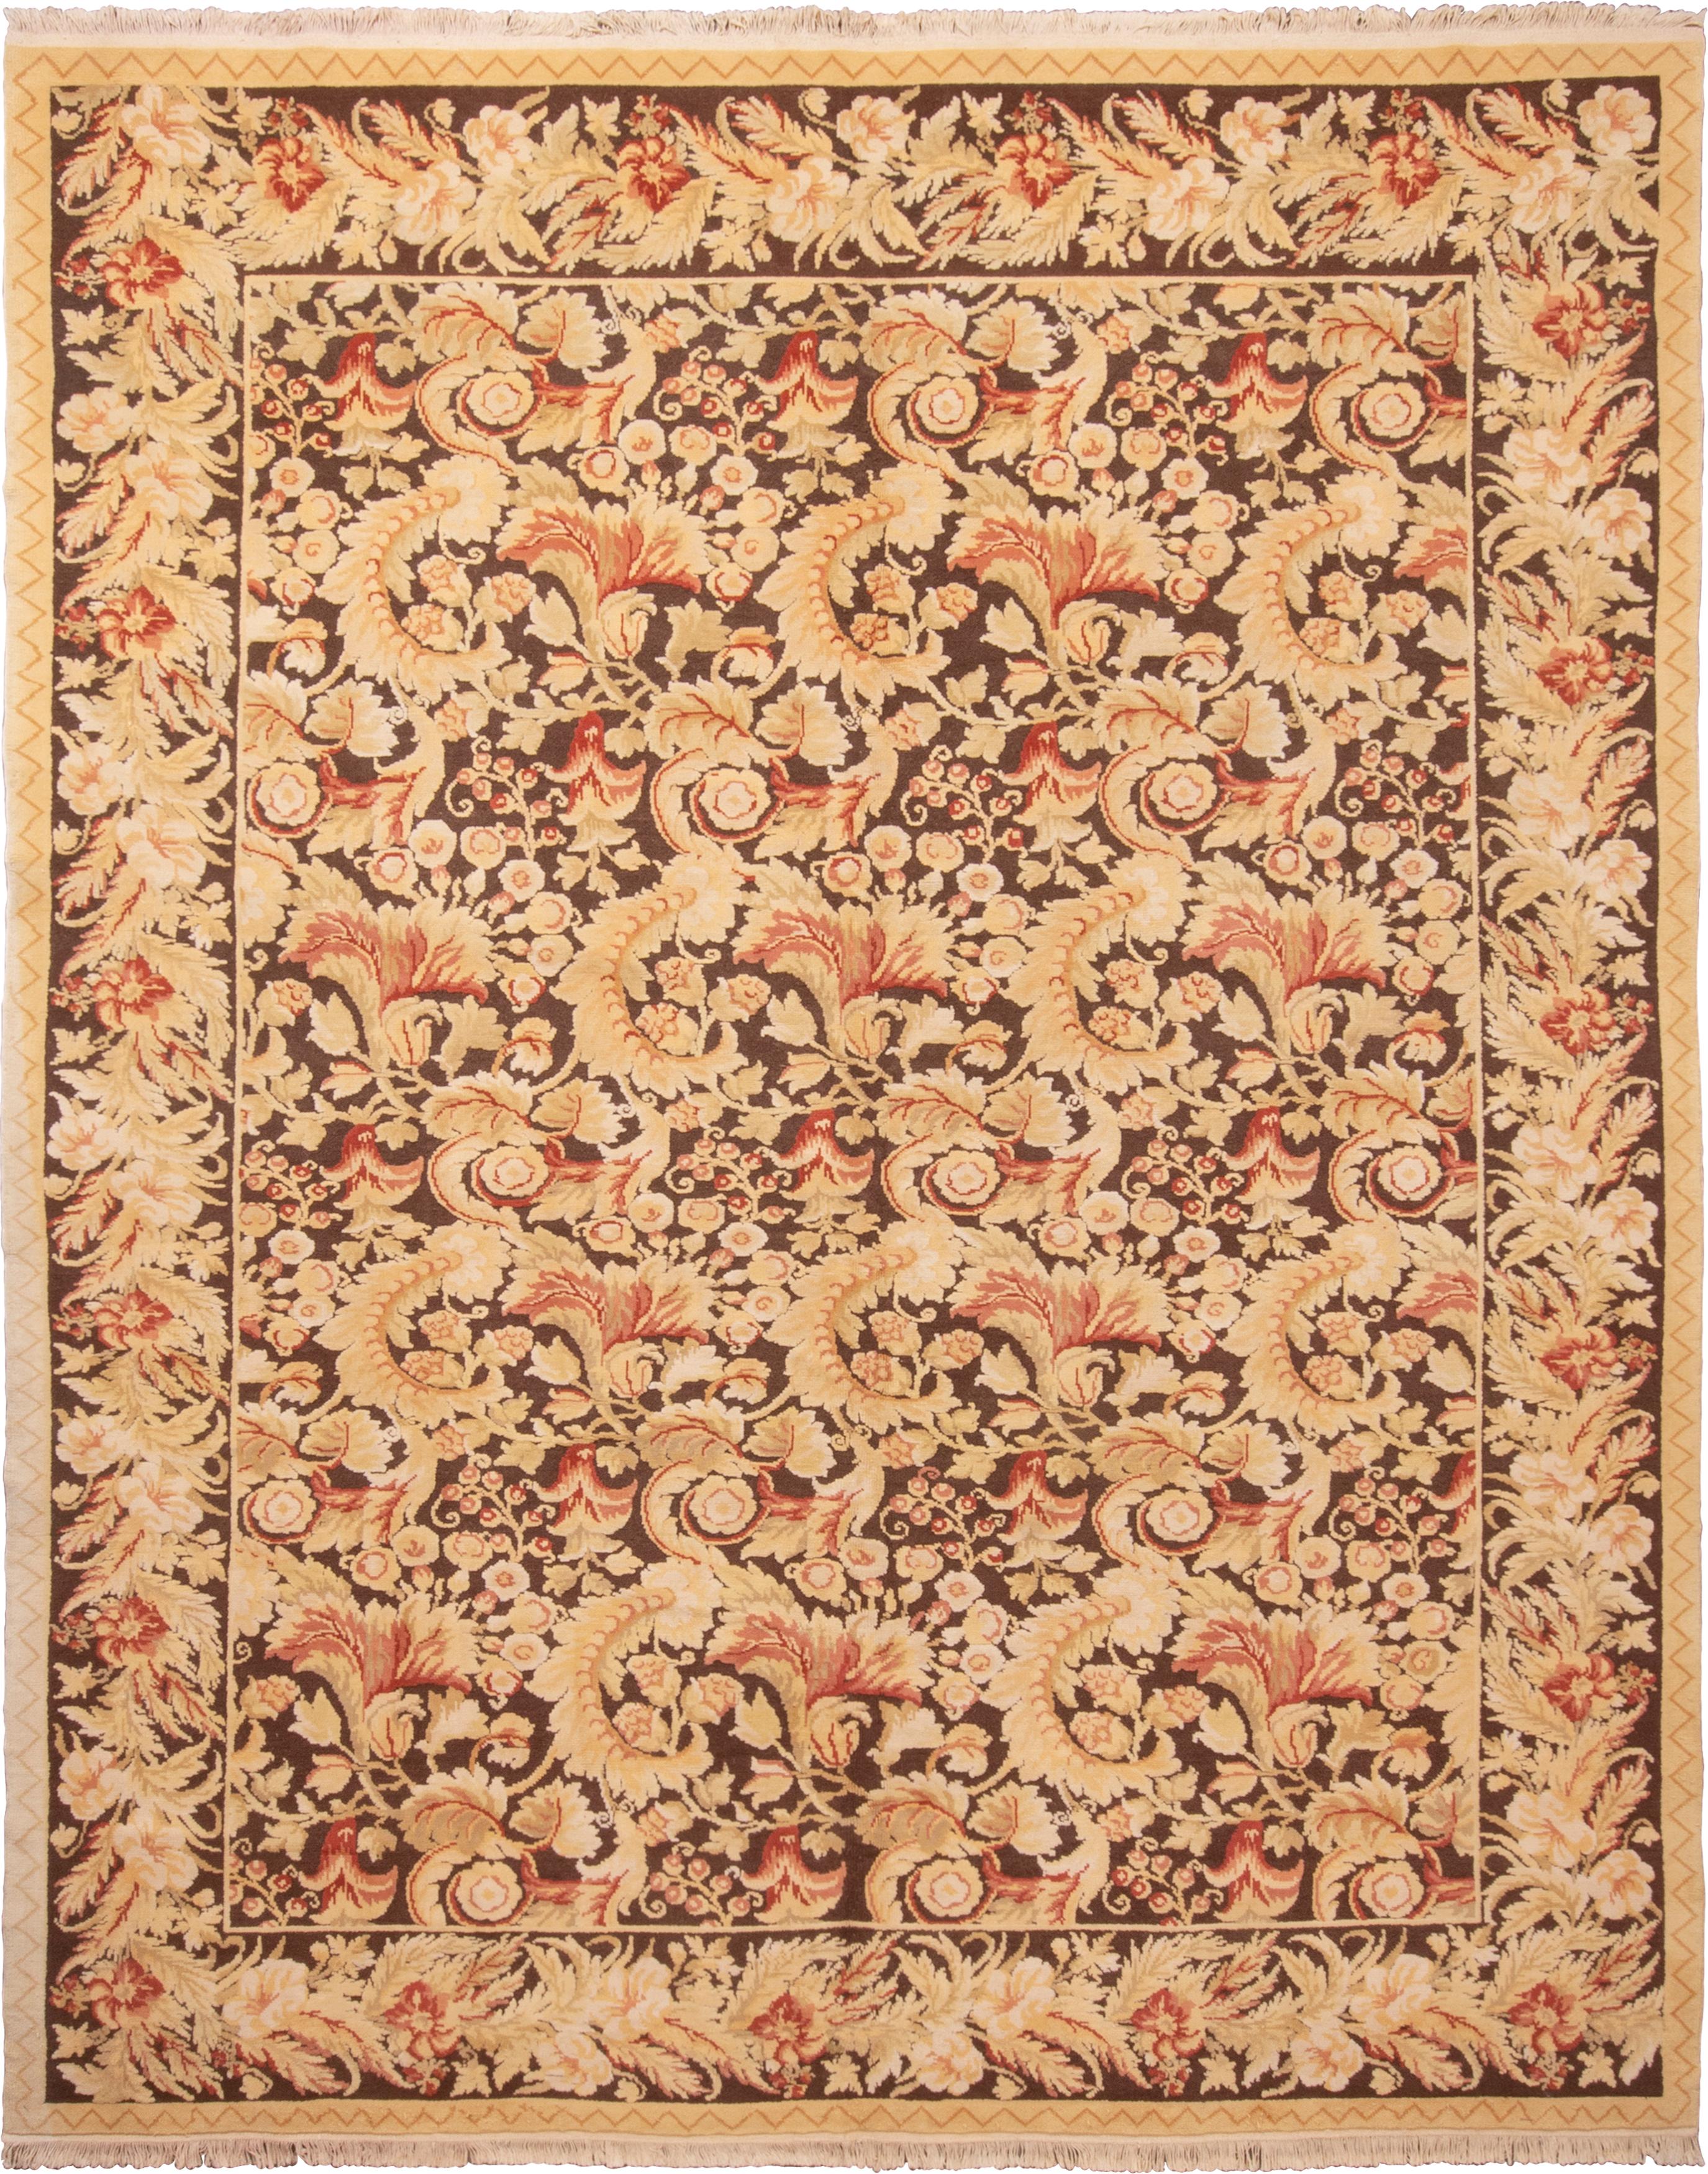 Originating from China, this transitional wool rug enjoys a modern interpretation of an 18th century design. Hand knotted in high quality wool, the all-over field design distinctly resembles the neoclassical golden-beige, brown, and pink colorways